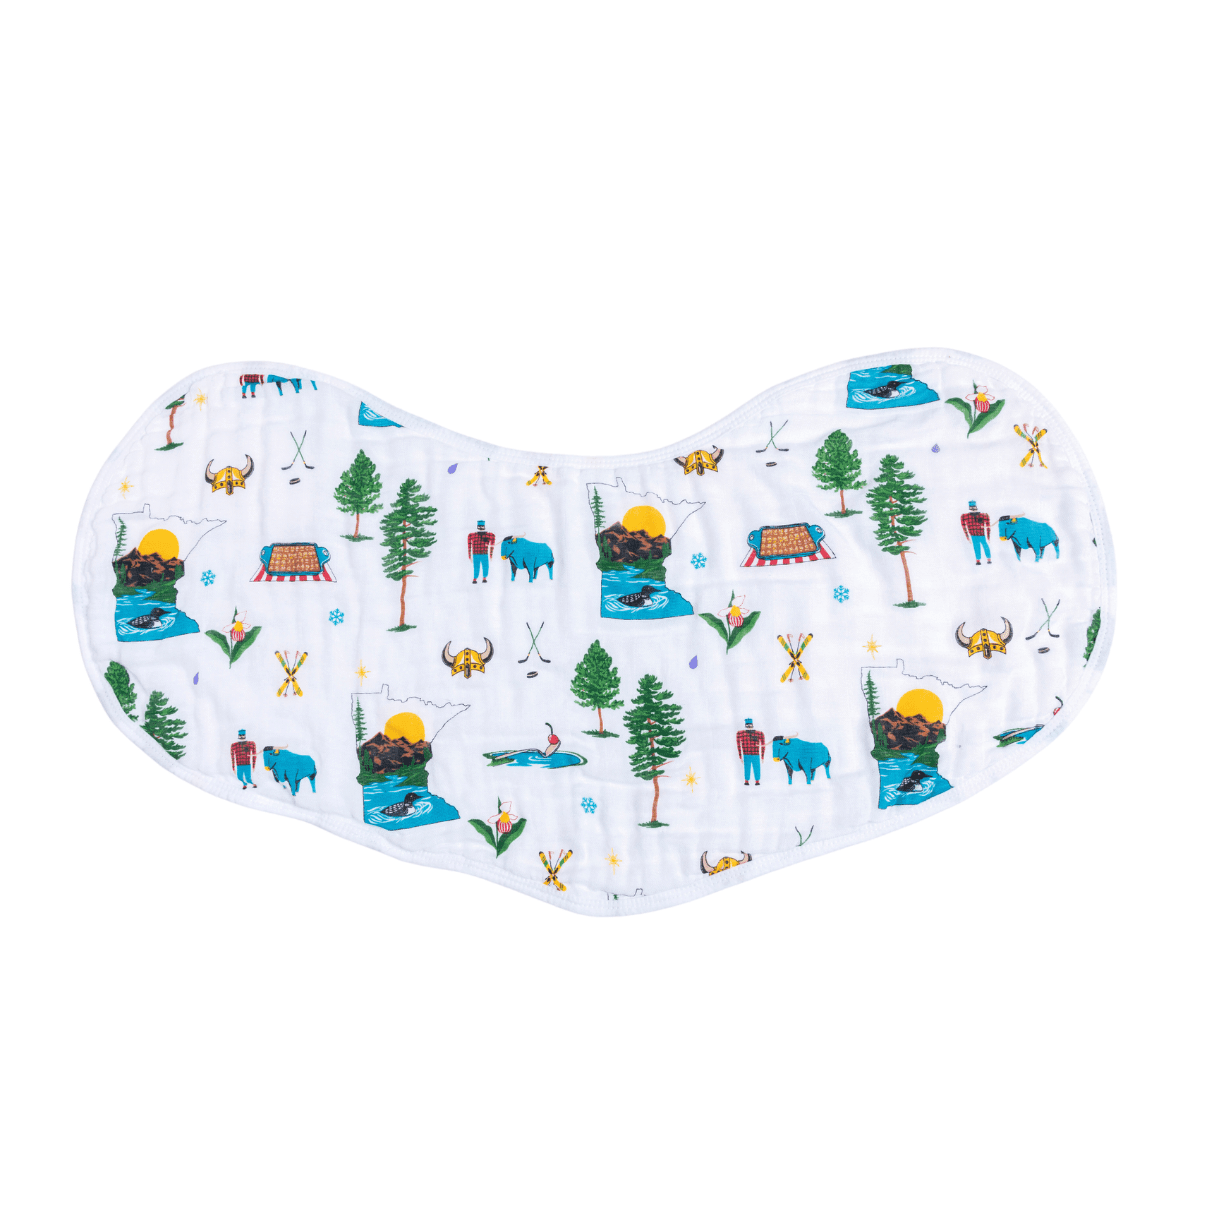 Minnesota-themed baby gift set with muslin swaddle blanket, burp cloth, and bib featuring state icons.